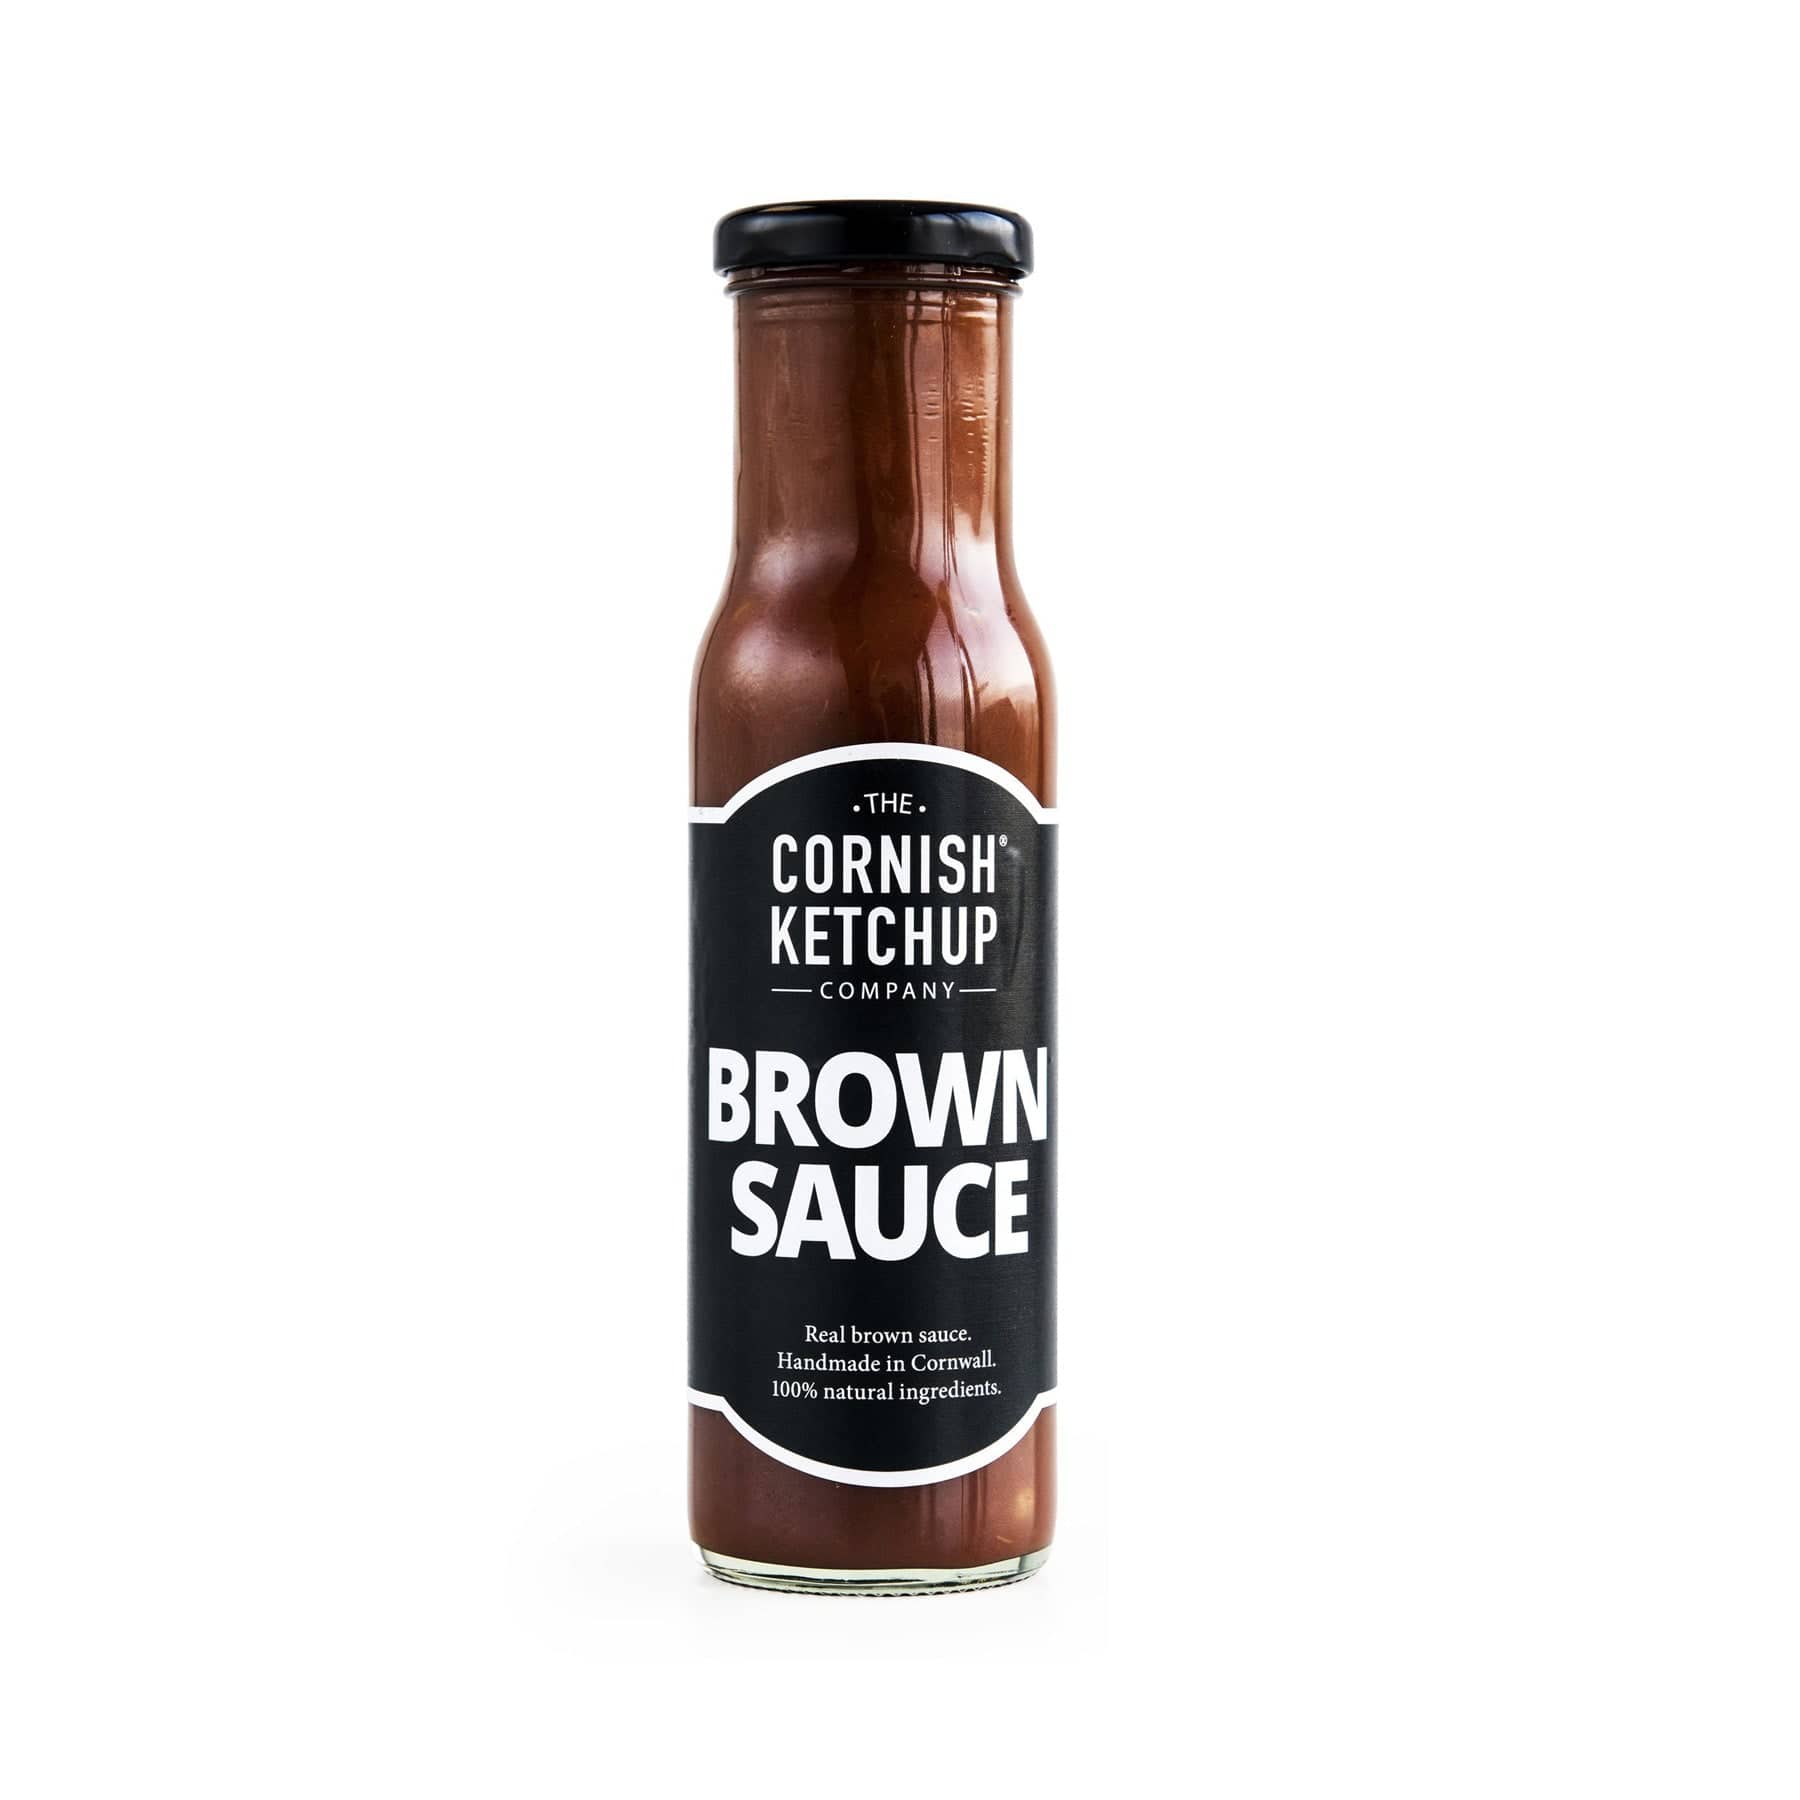 Cornish Ketchup Company brown sauce bottle on white background, real brown sauce handmade in Cornwall with 100% natural ingredients text on label.